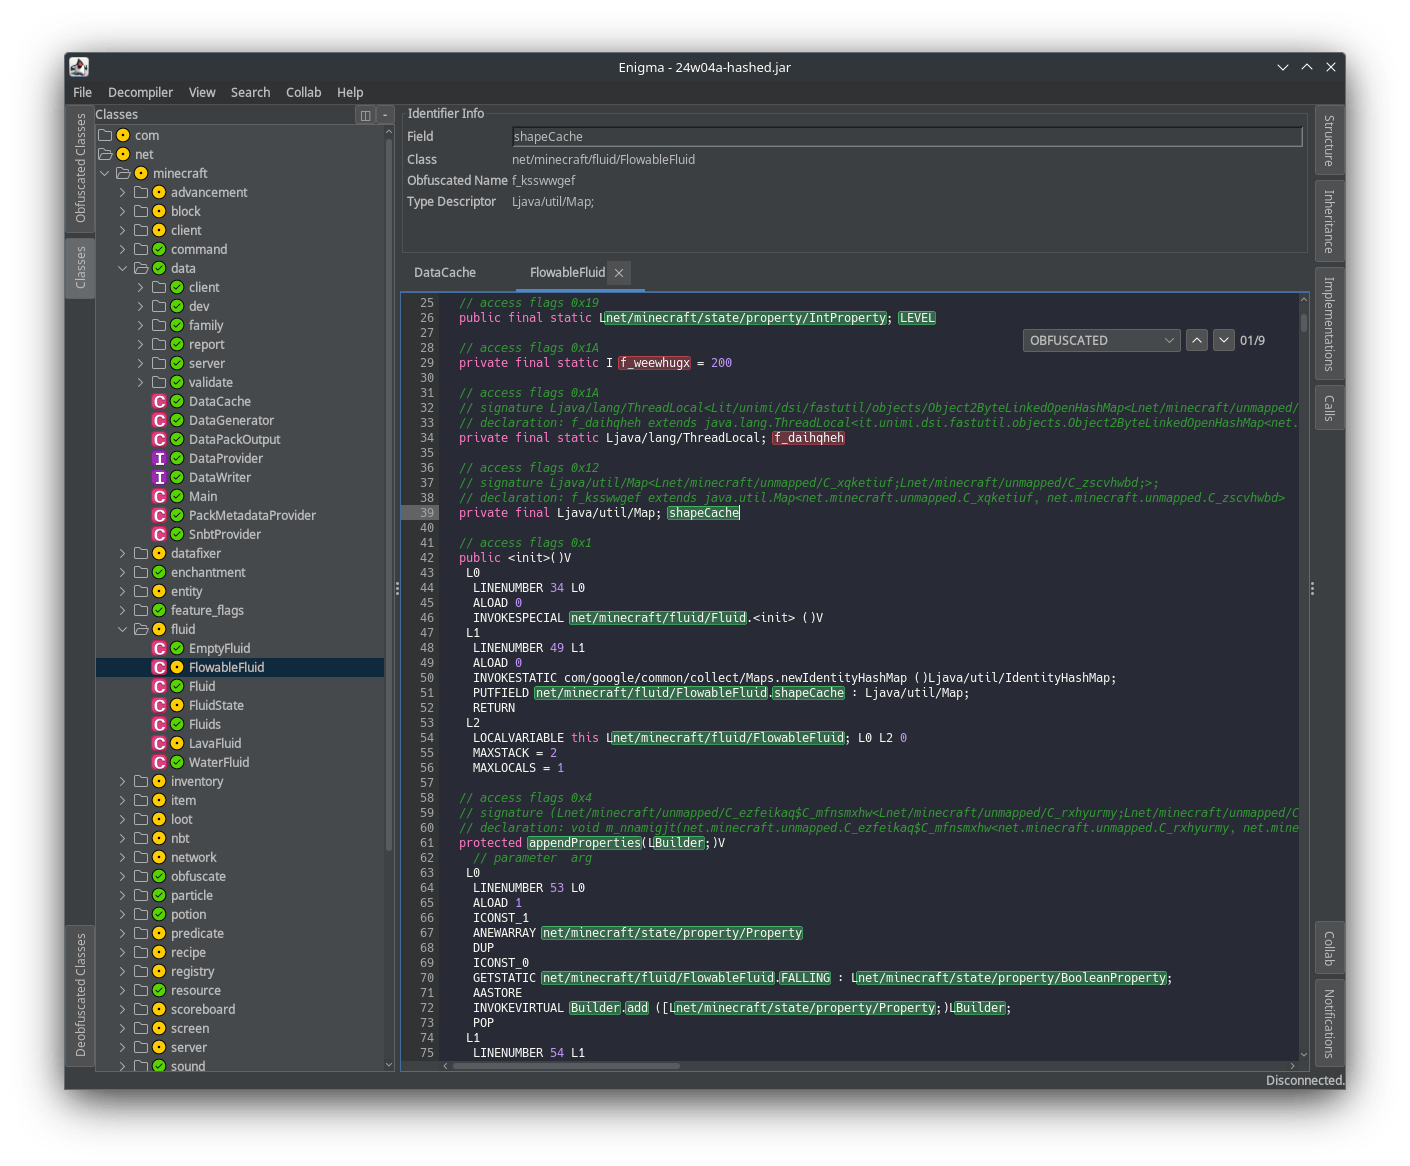 The lovely new Enigma bytecode view.